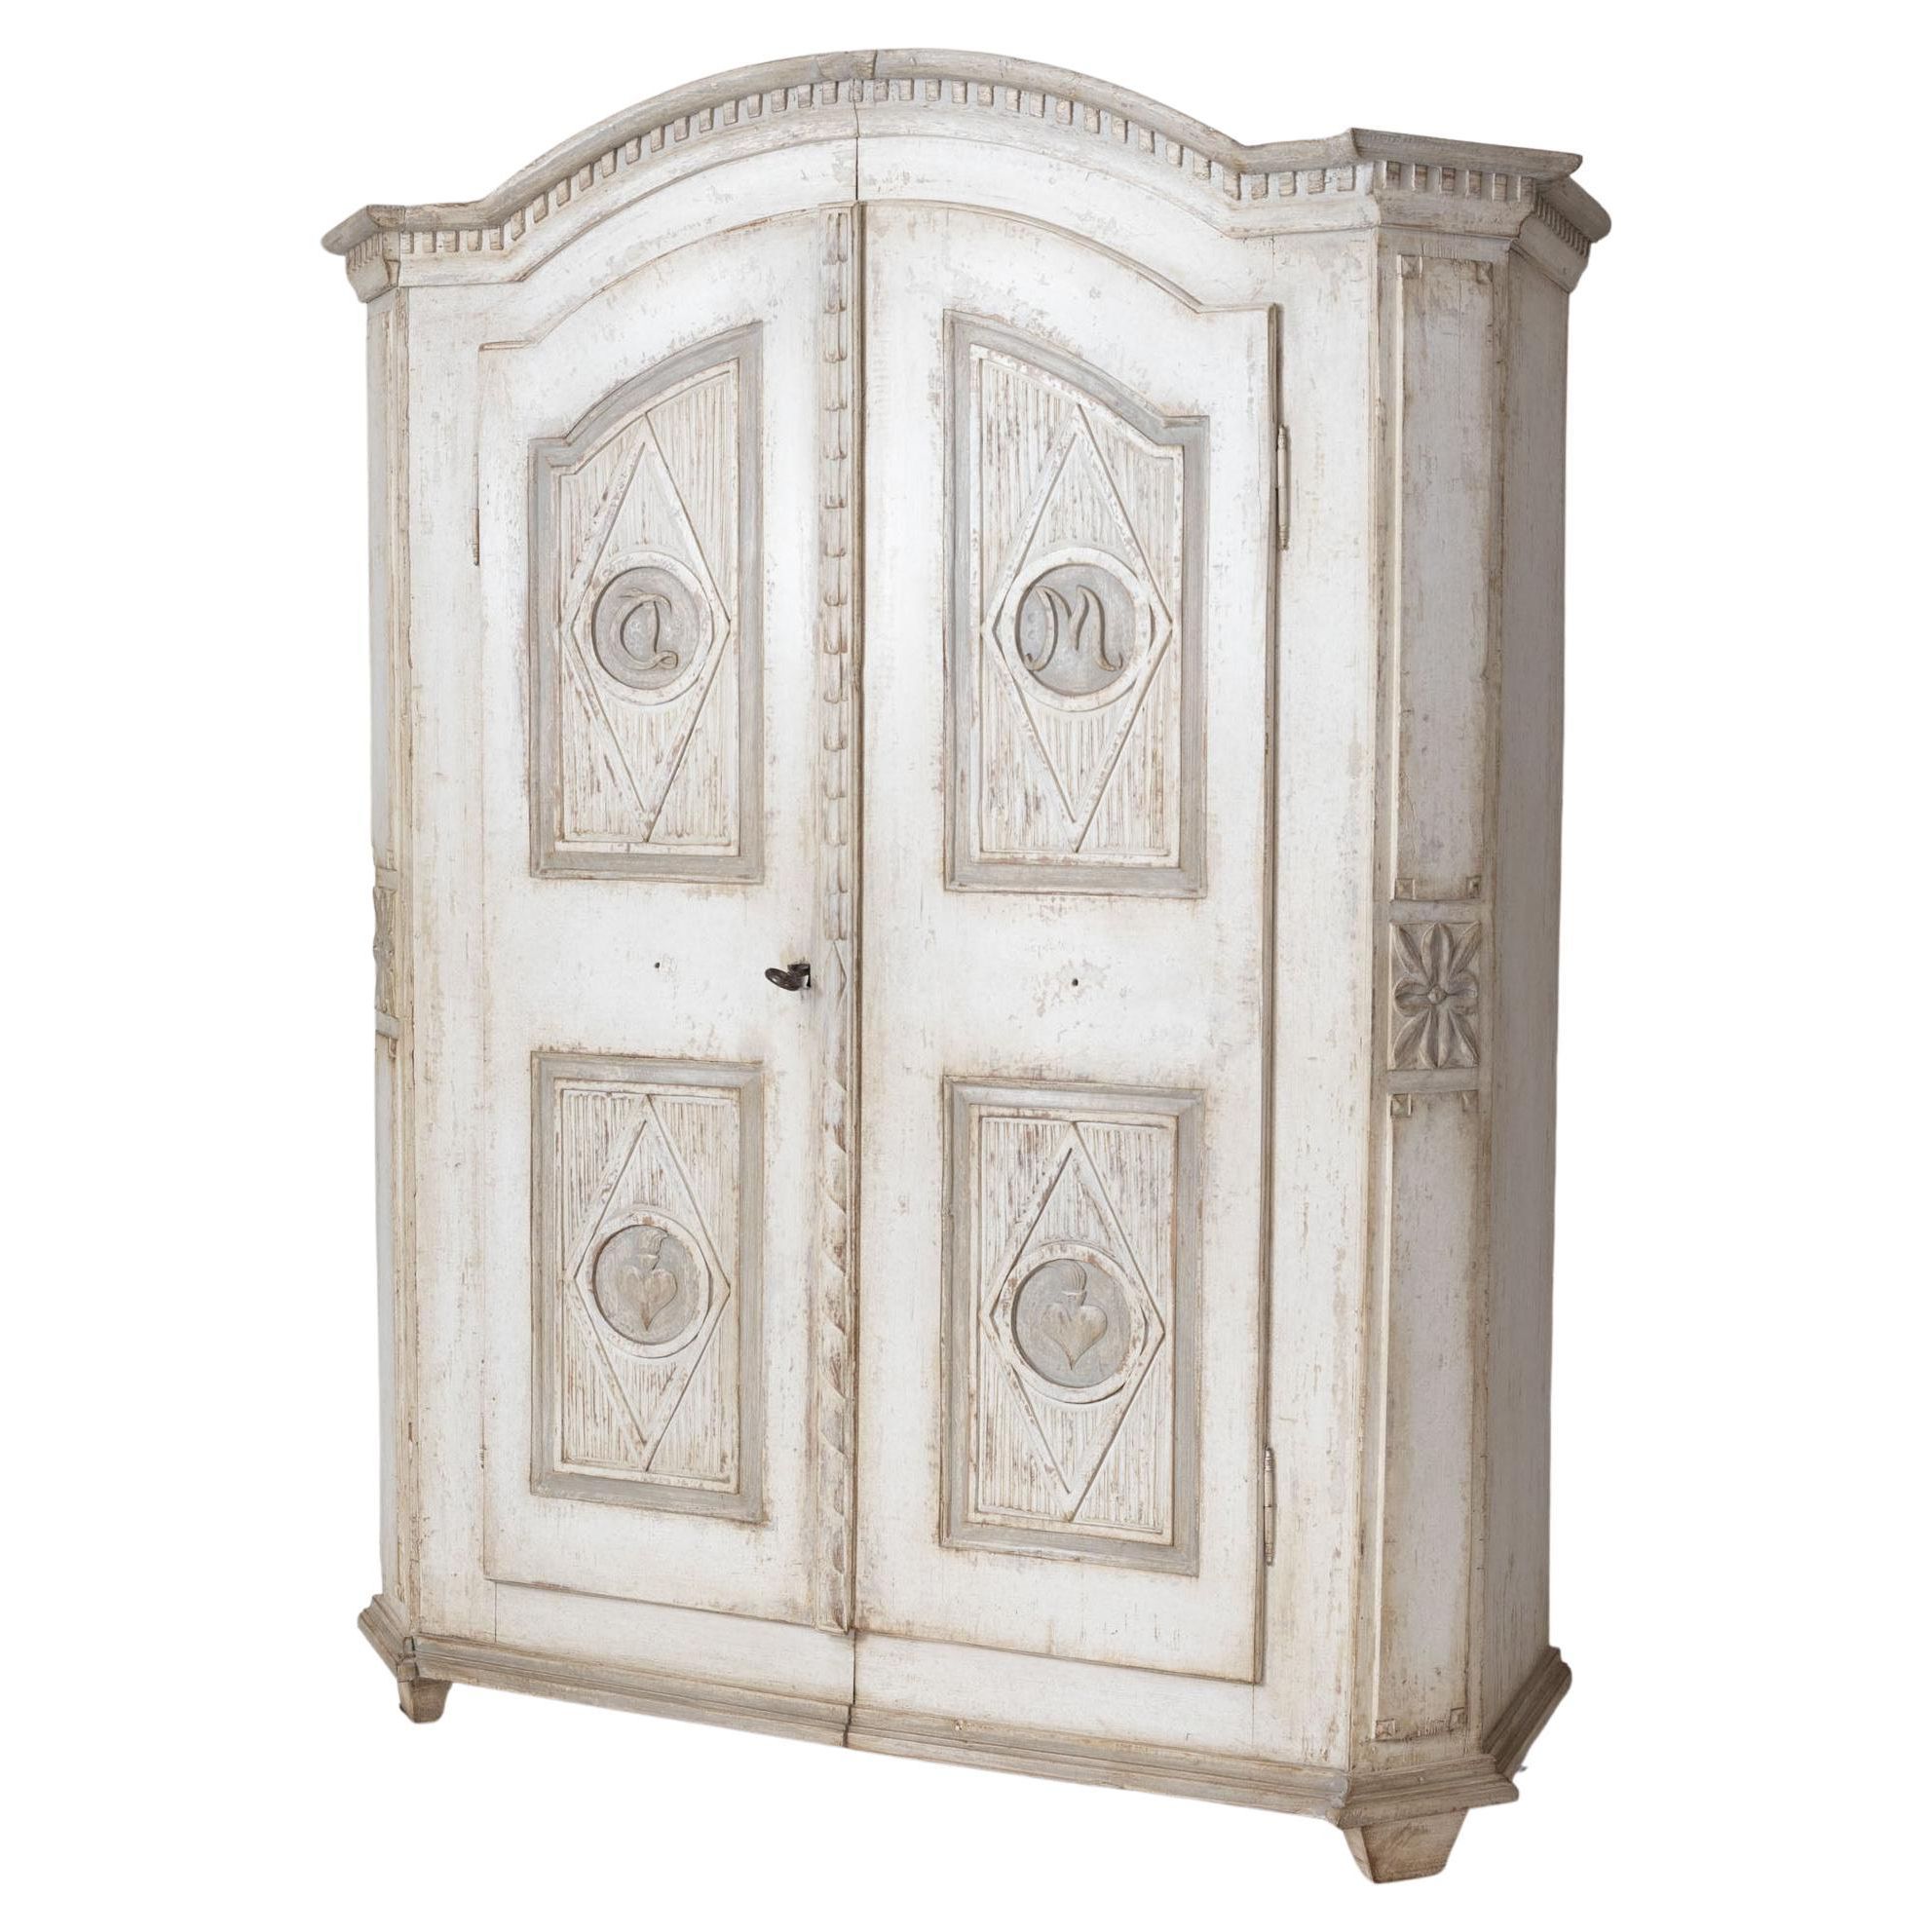 Two Door Armoire Or Wardrobe For Clothes, White Paint With Patina, 19th  Century For Sale At 1stdibs Inside White French Armoire Wardrobes (View 18 of 20)